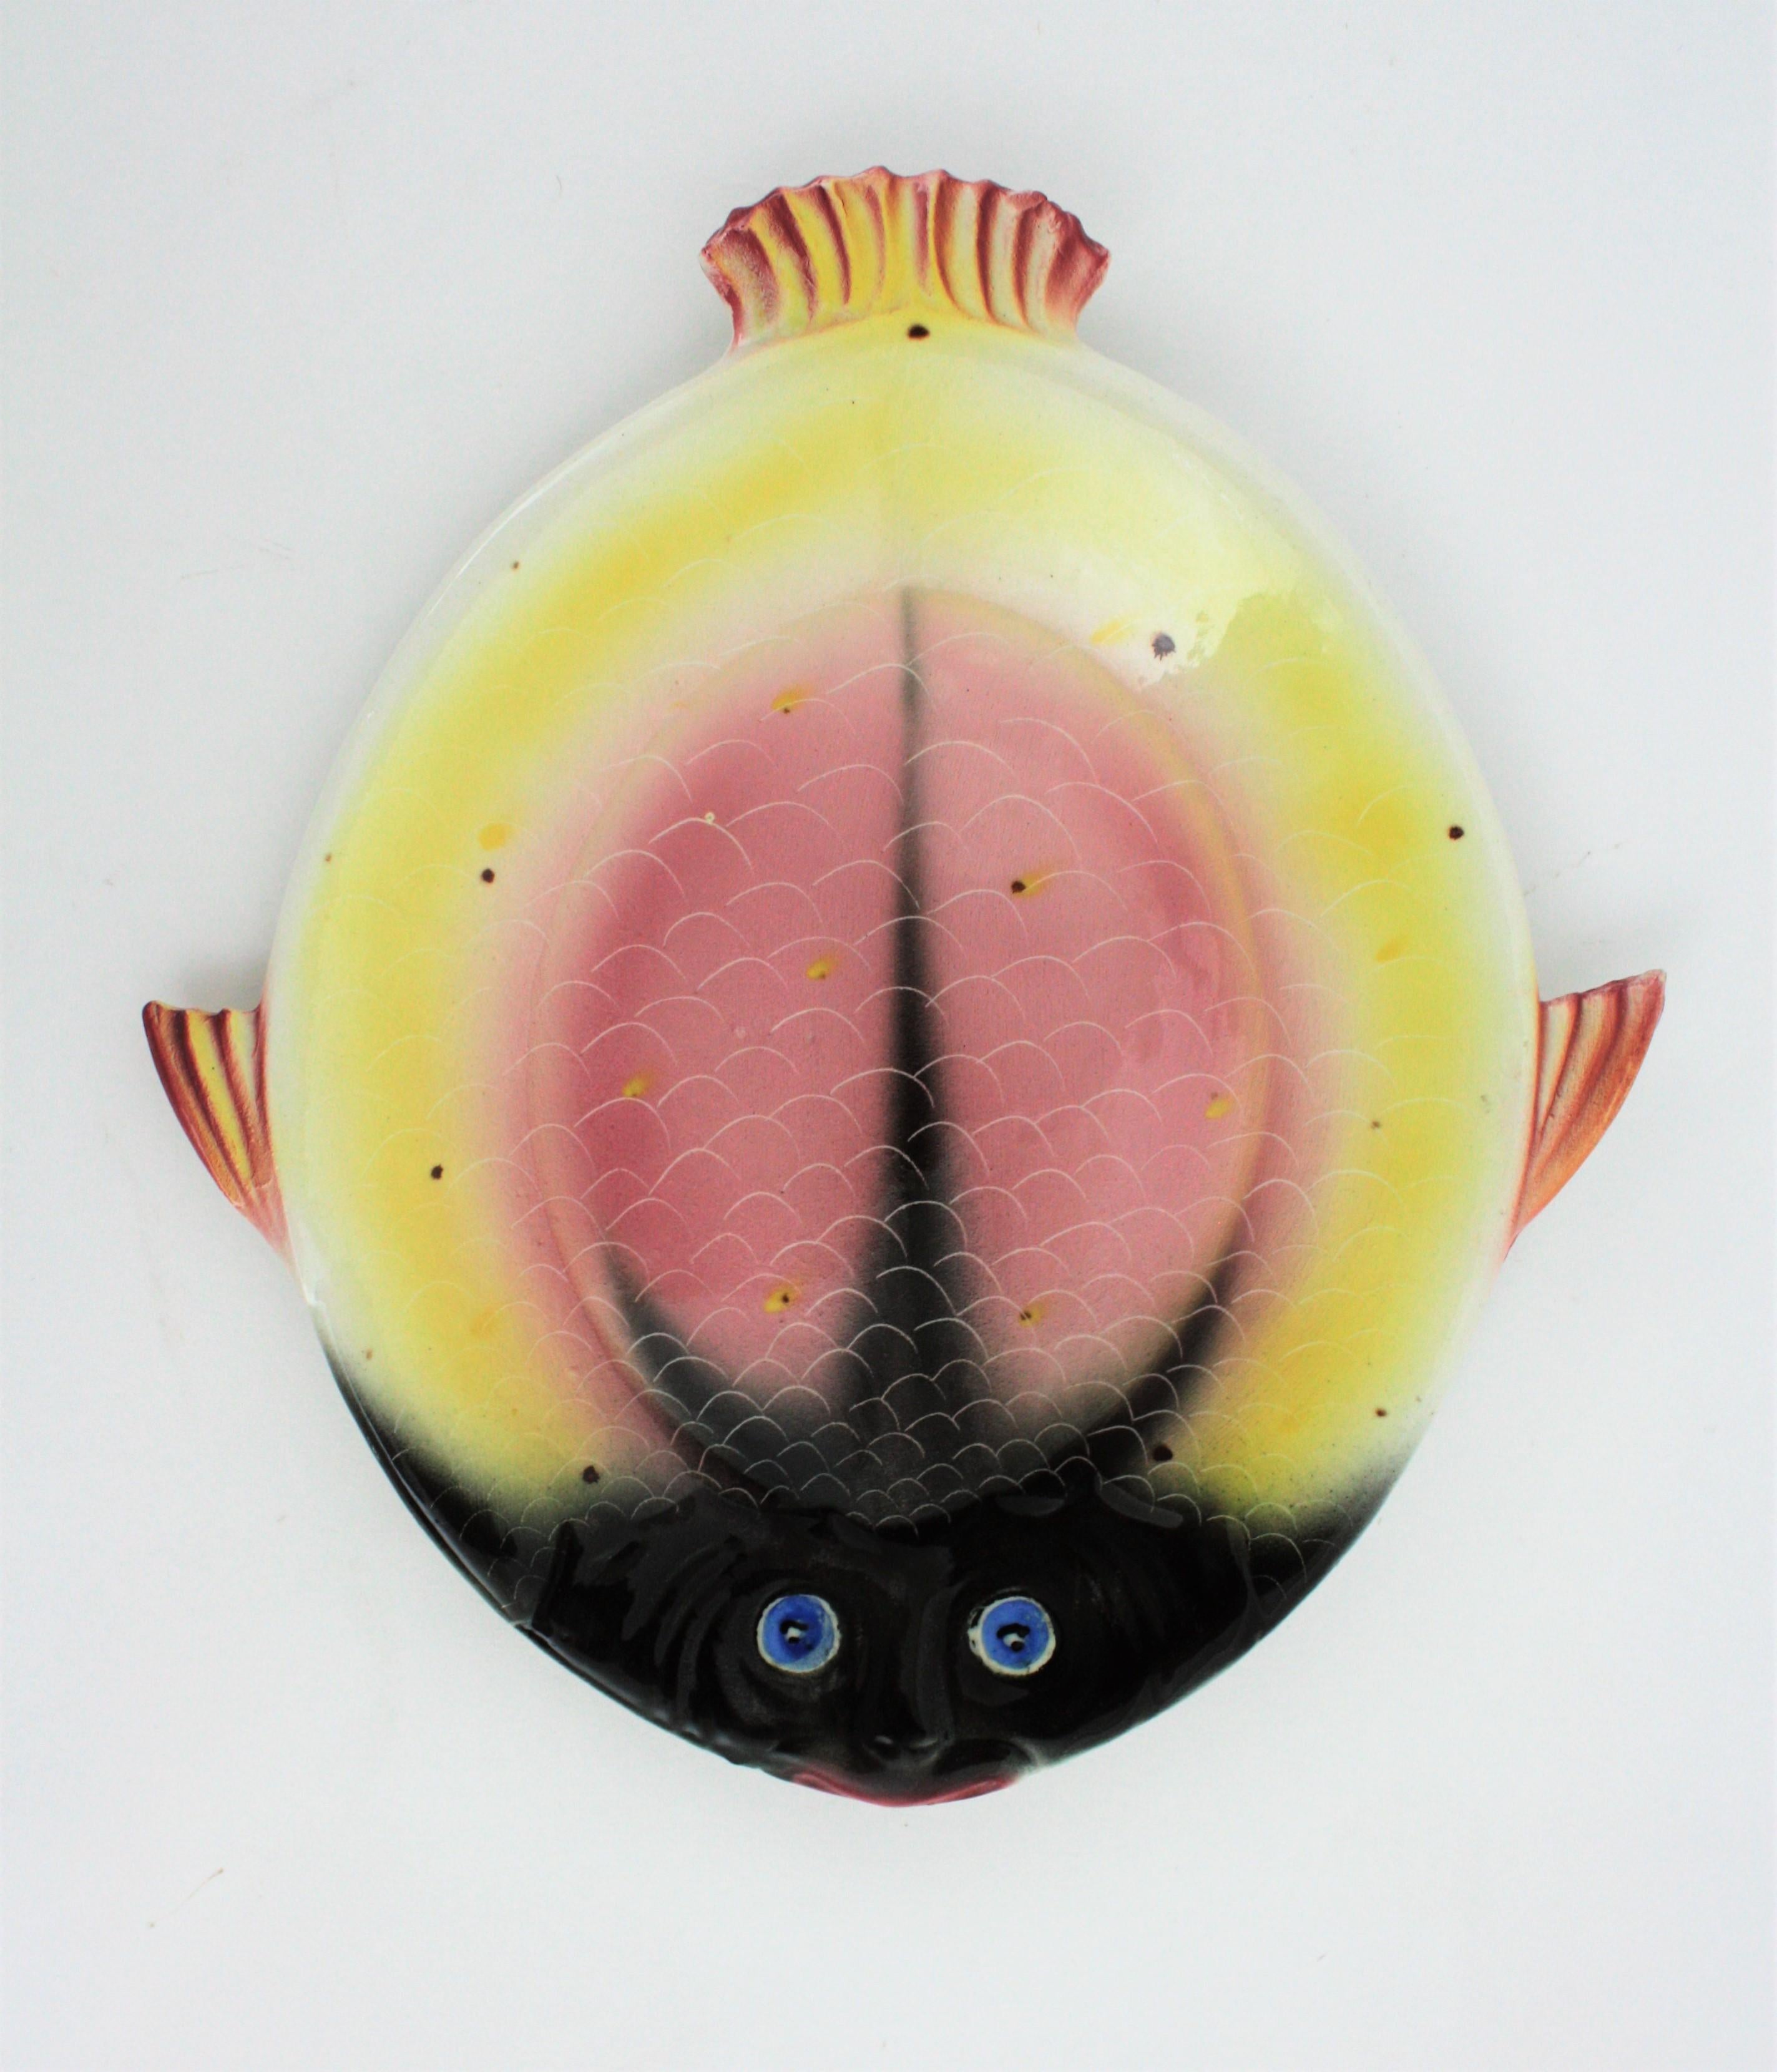 A lovely glazed ceramic sole fish in pink, yellow and black color. An attractive piece to use as vide-poche, decorative dish or wall decoration.
Italy, 1950s. (Marked Italy on the back).